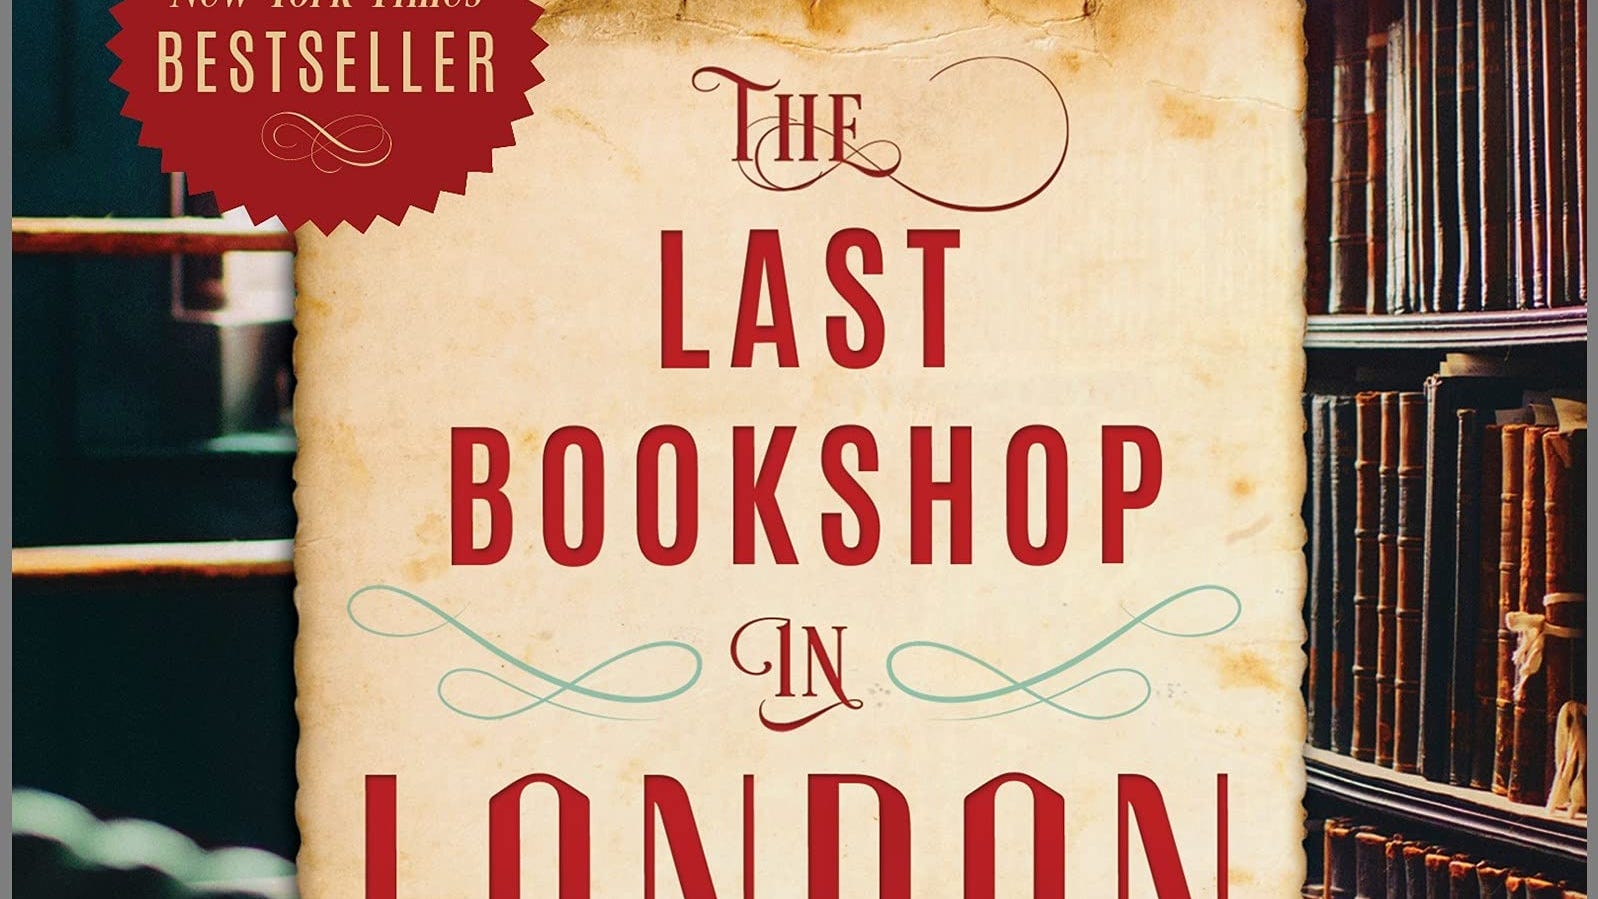 book review the last bookshop in london